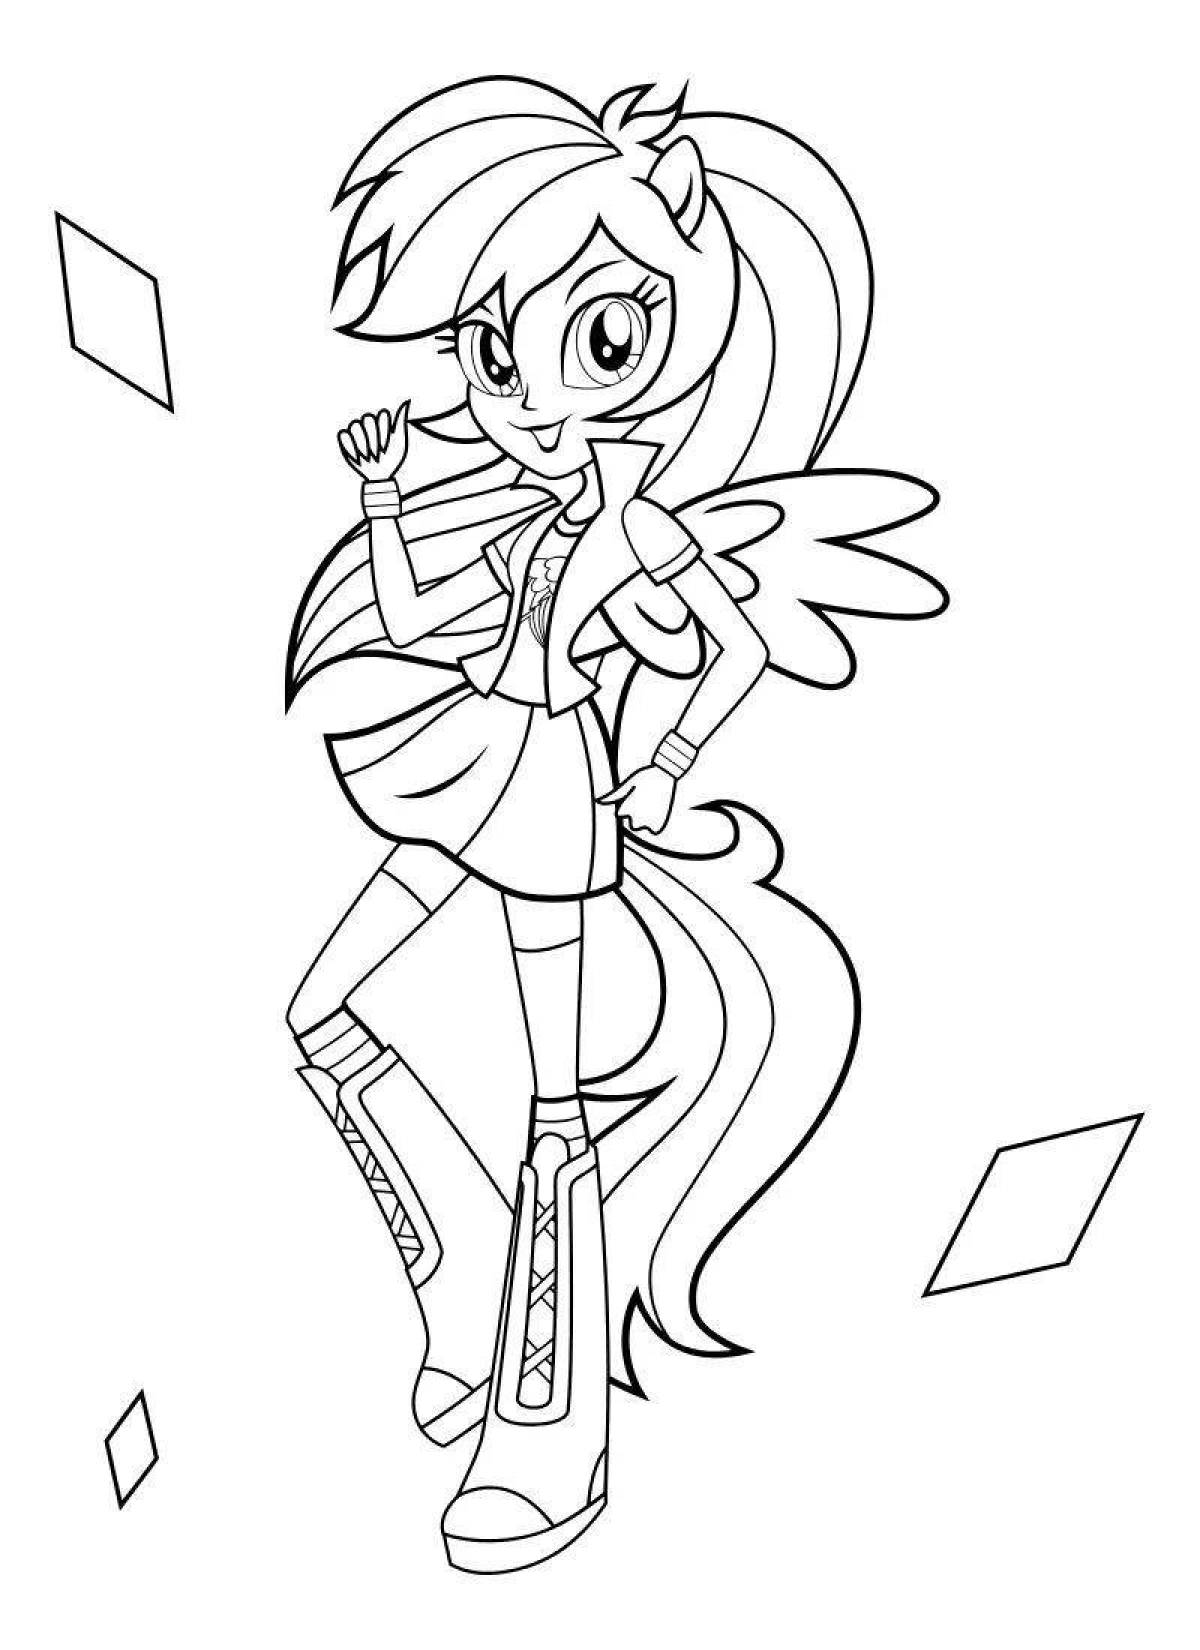 Coloring page nice pony people